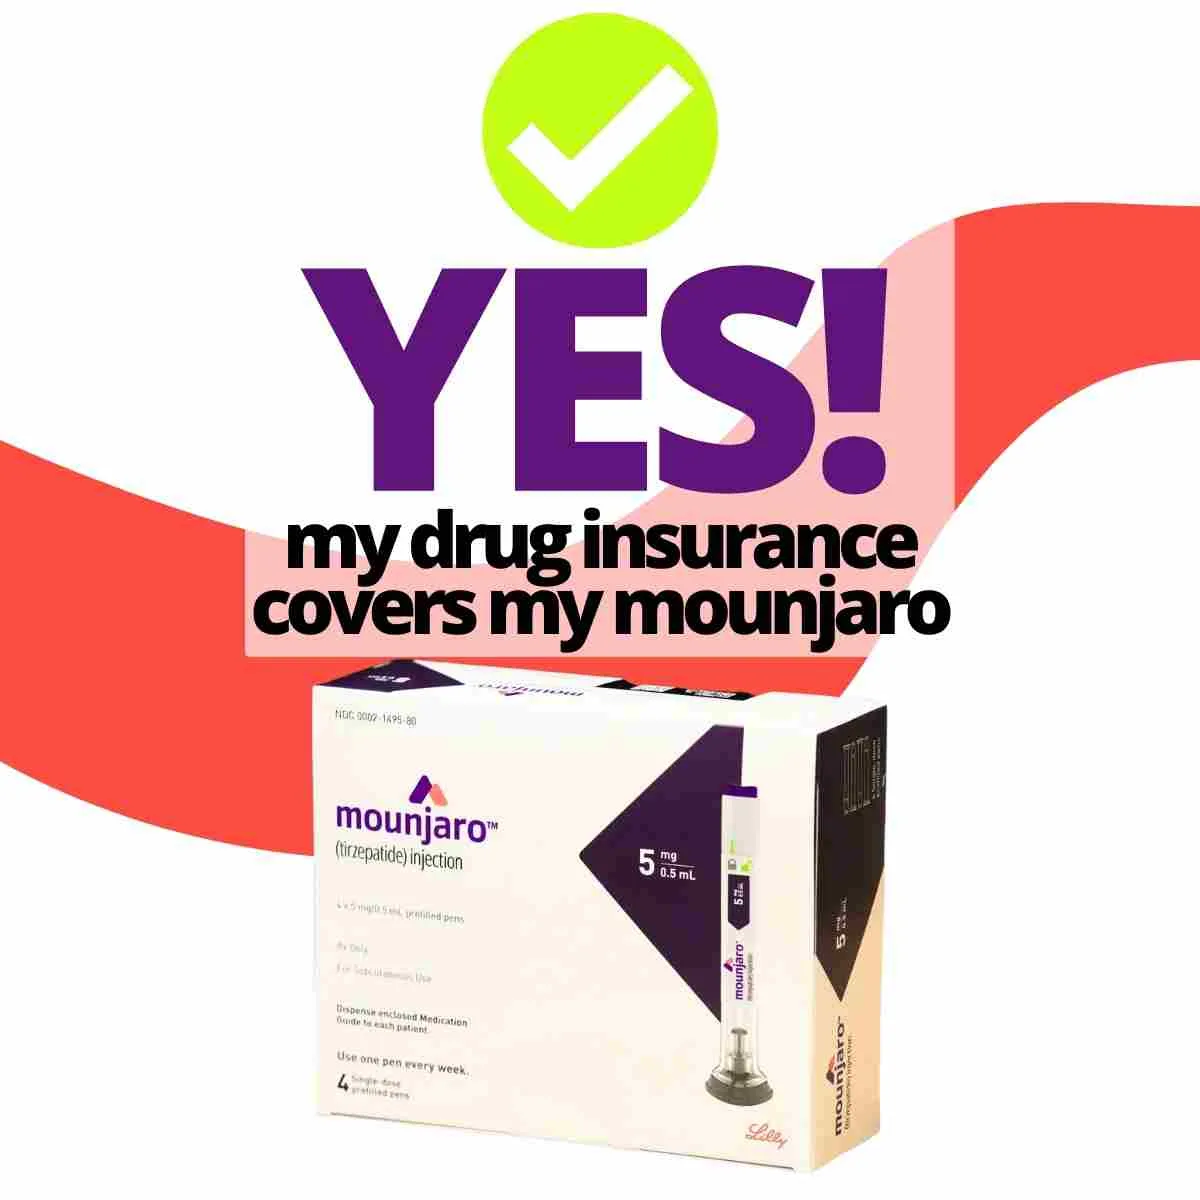 yes my drug insurance does cover my mounjaro